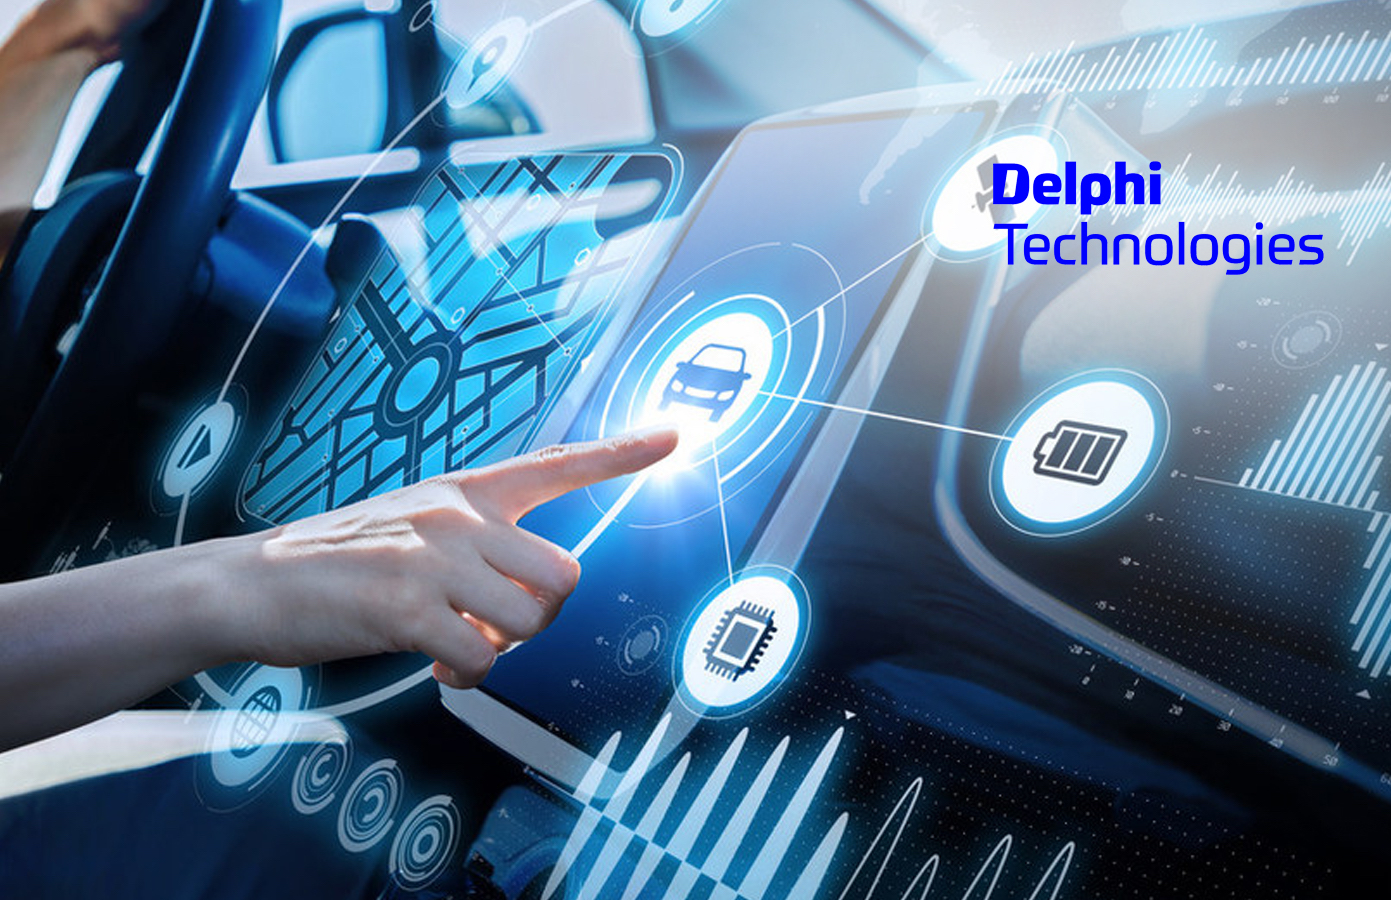 Learn about Delphi Technologies multi-charge ignition coils